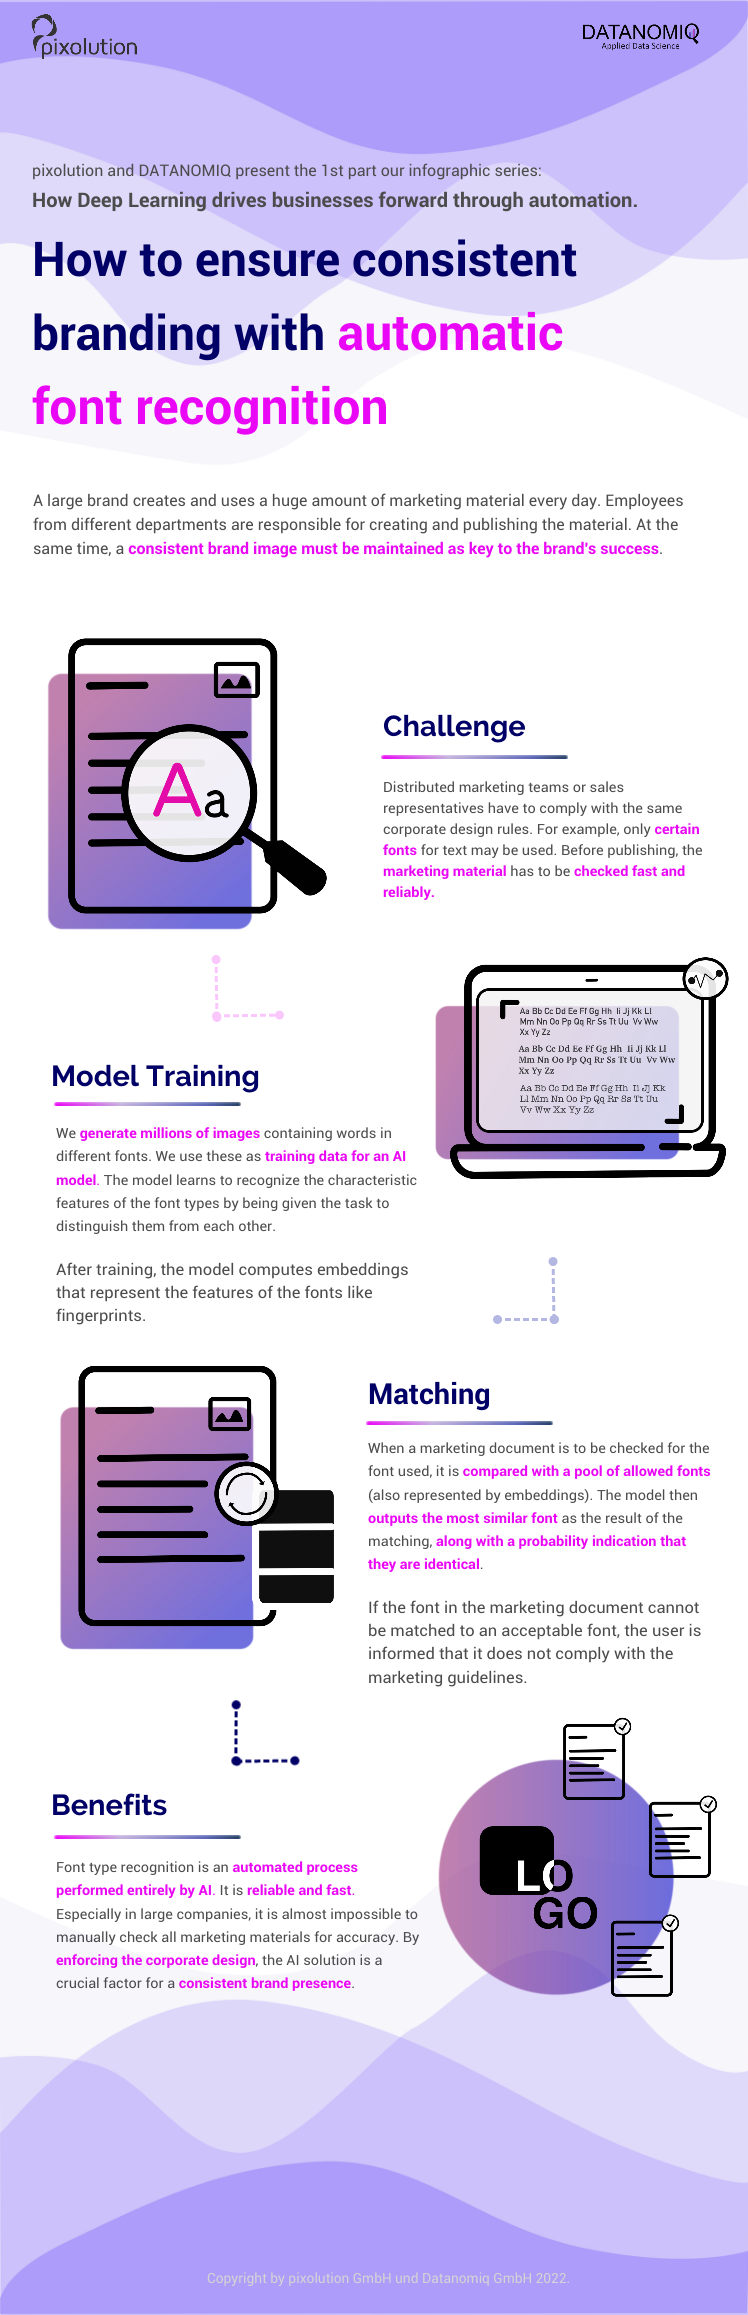 How to ensure consistent branding with automatic font recognition - Infographic